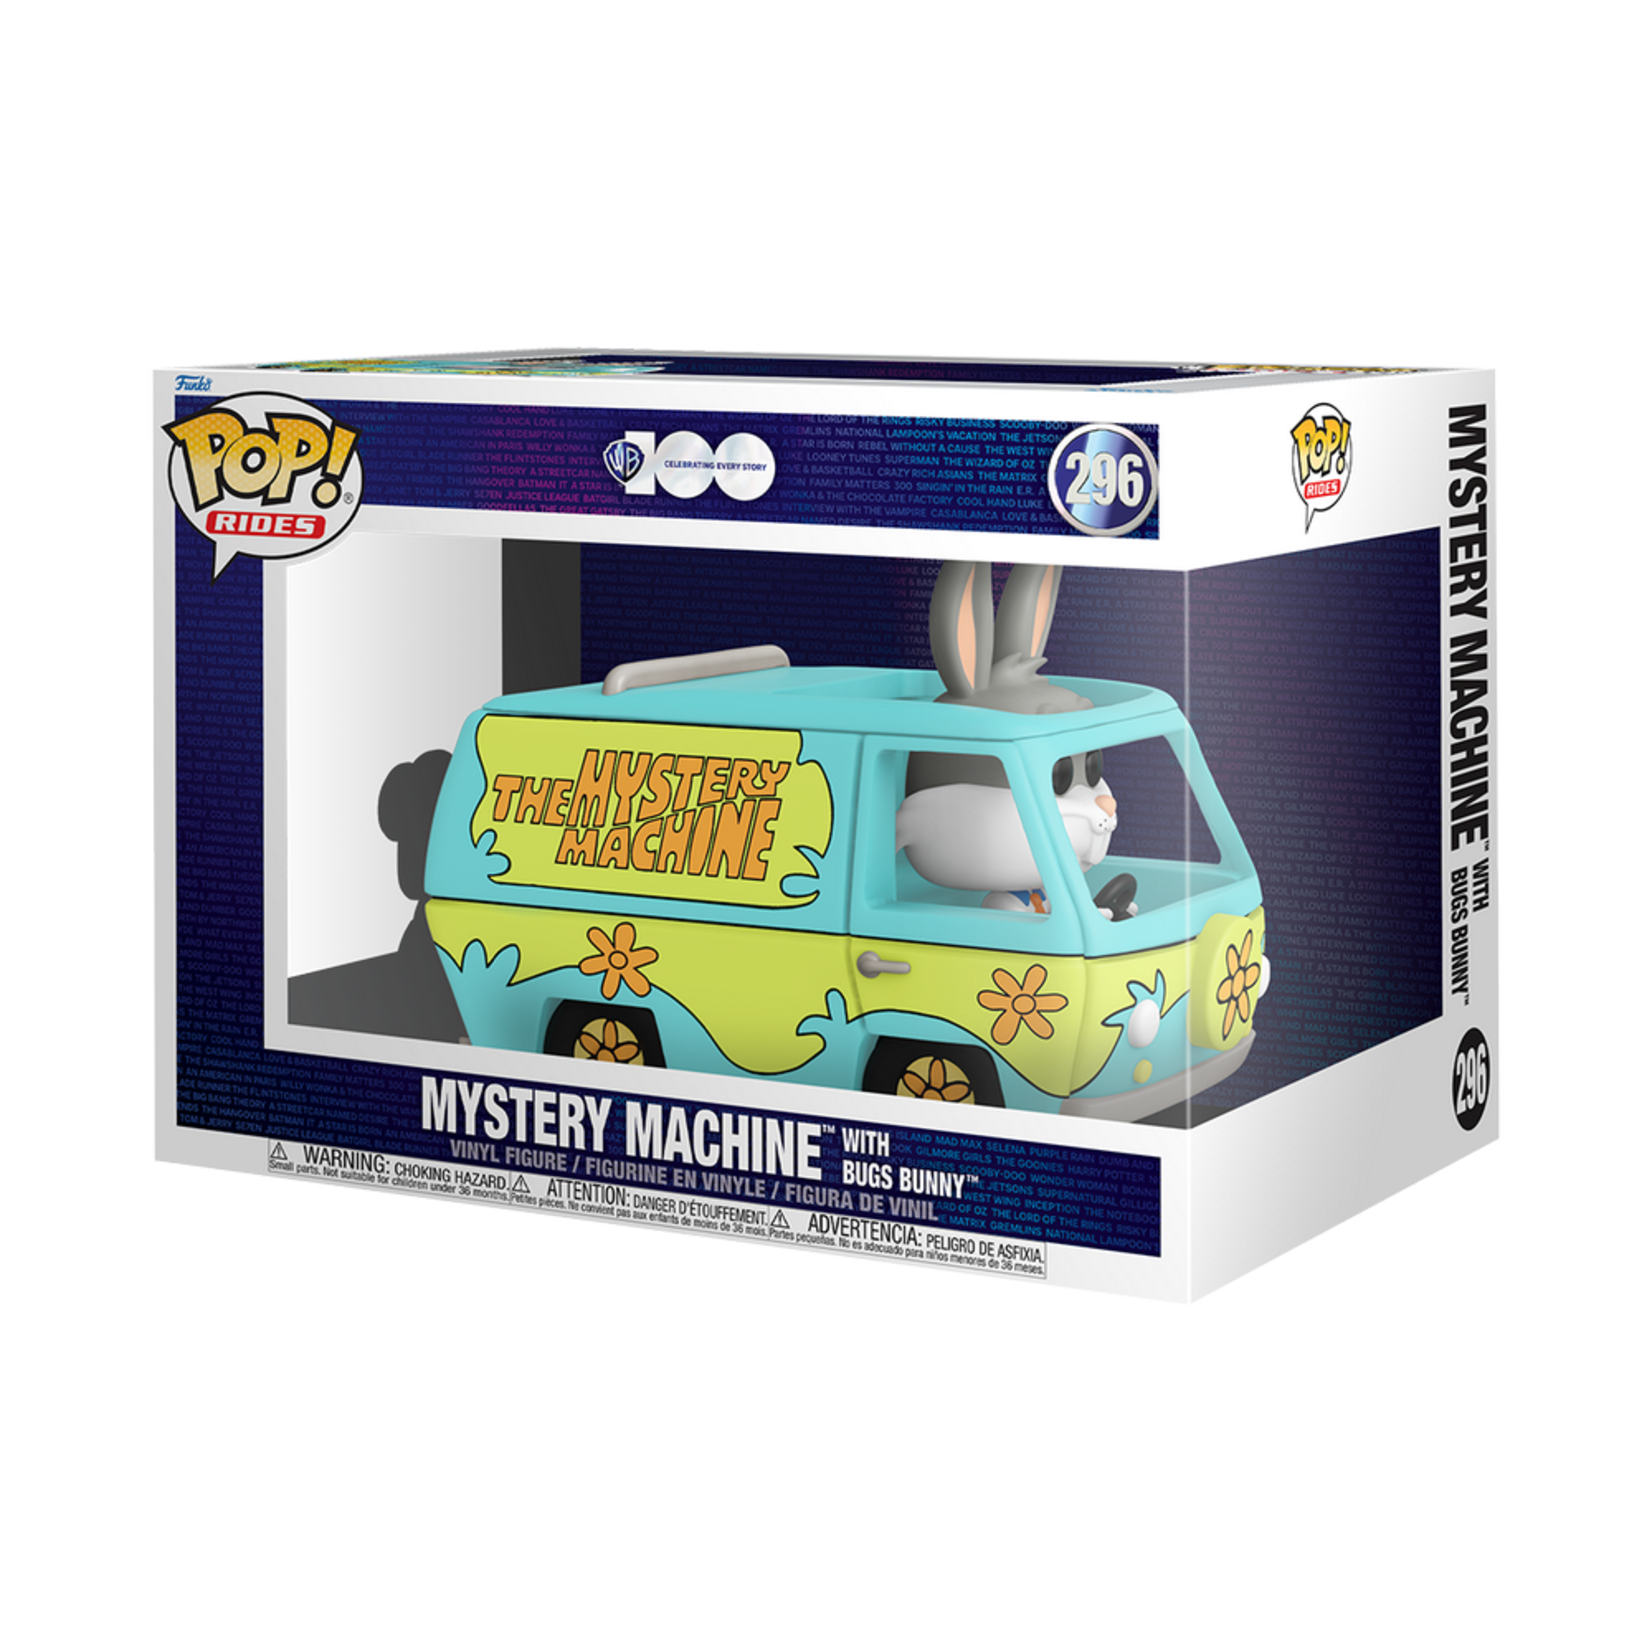 Funko Animation 0296 Mystery Machine with Bugs Bunny WB Warner Bros 100th Looney Tunes & Scooby Doo Mash-Ups